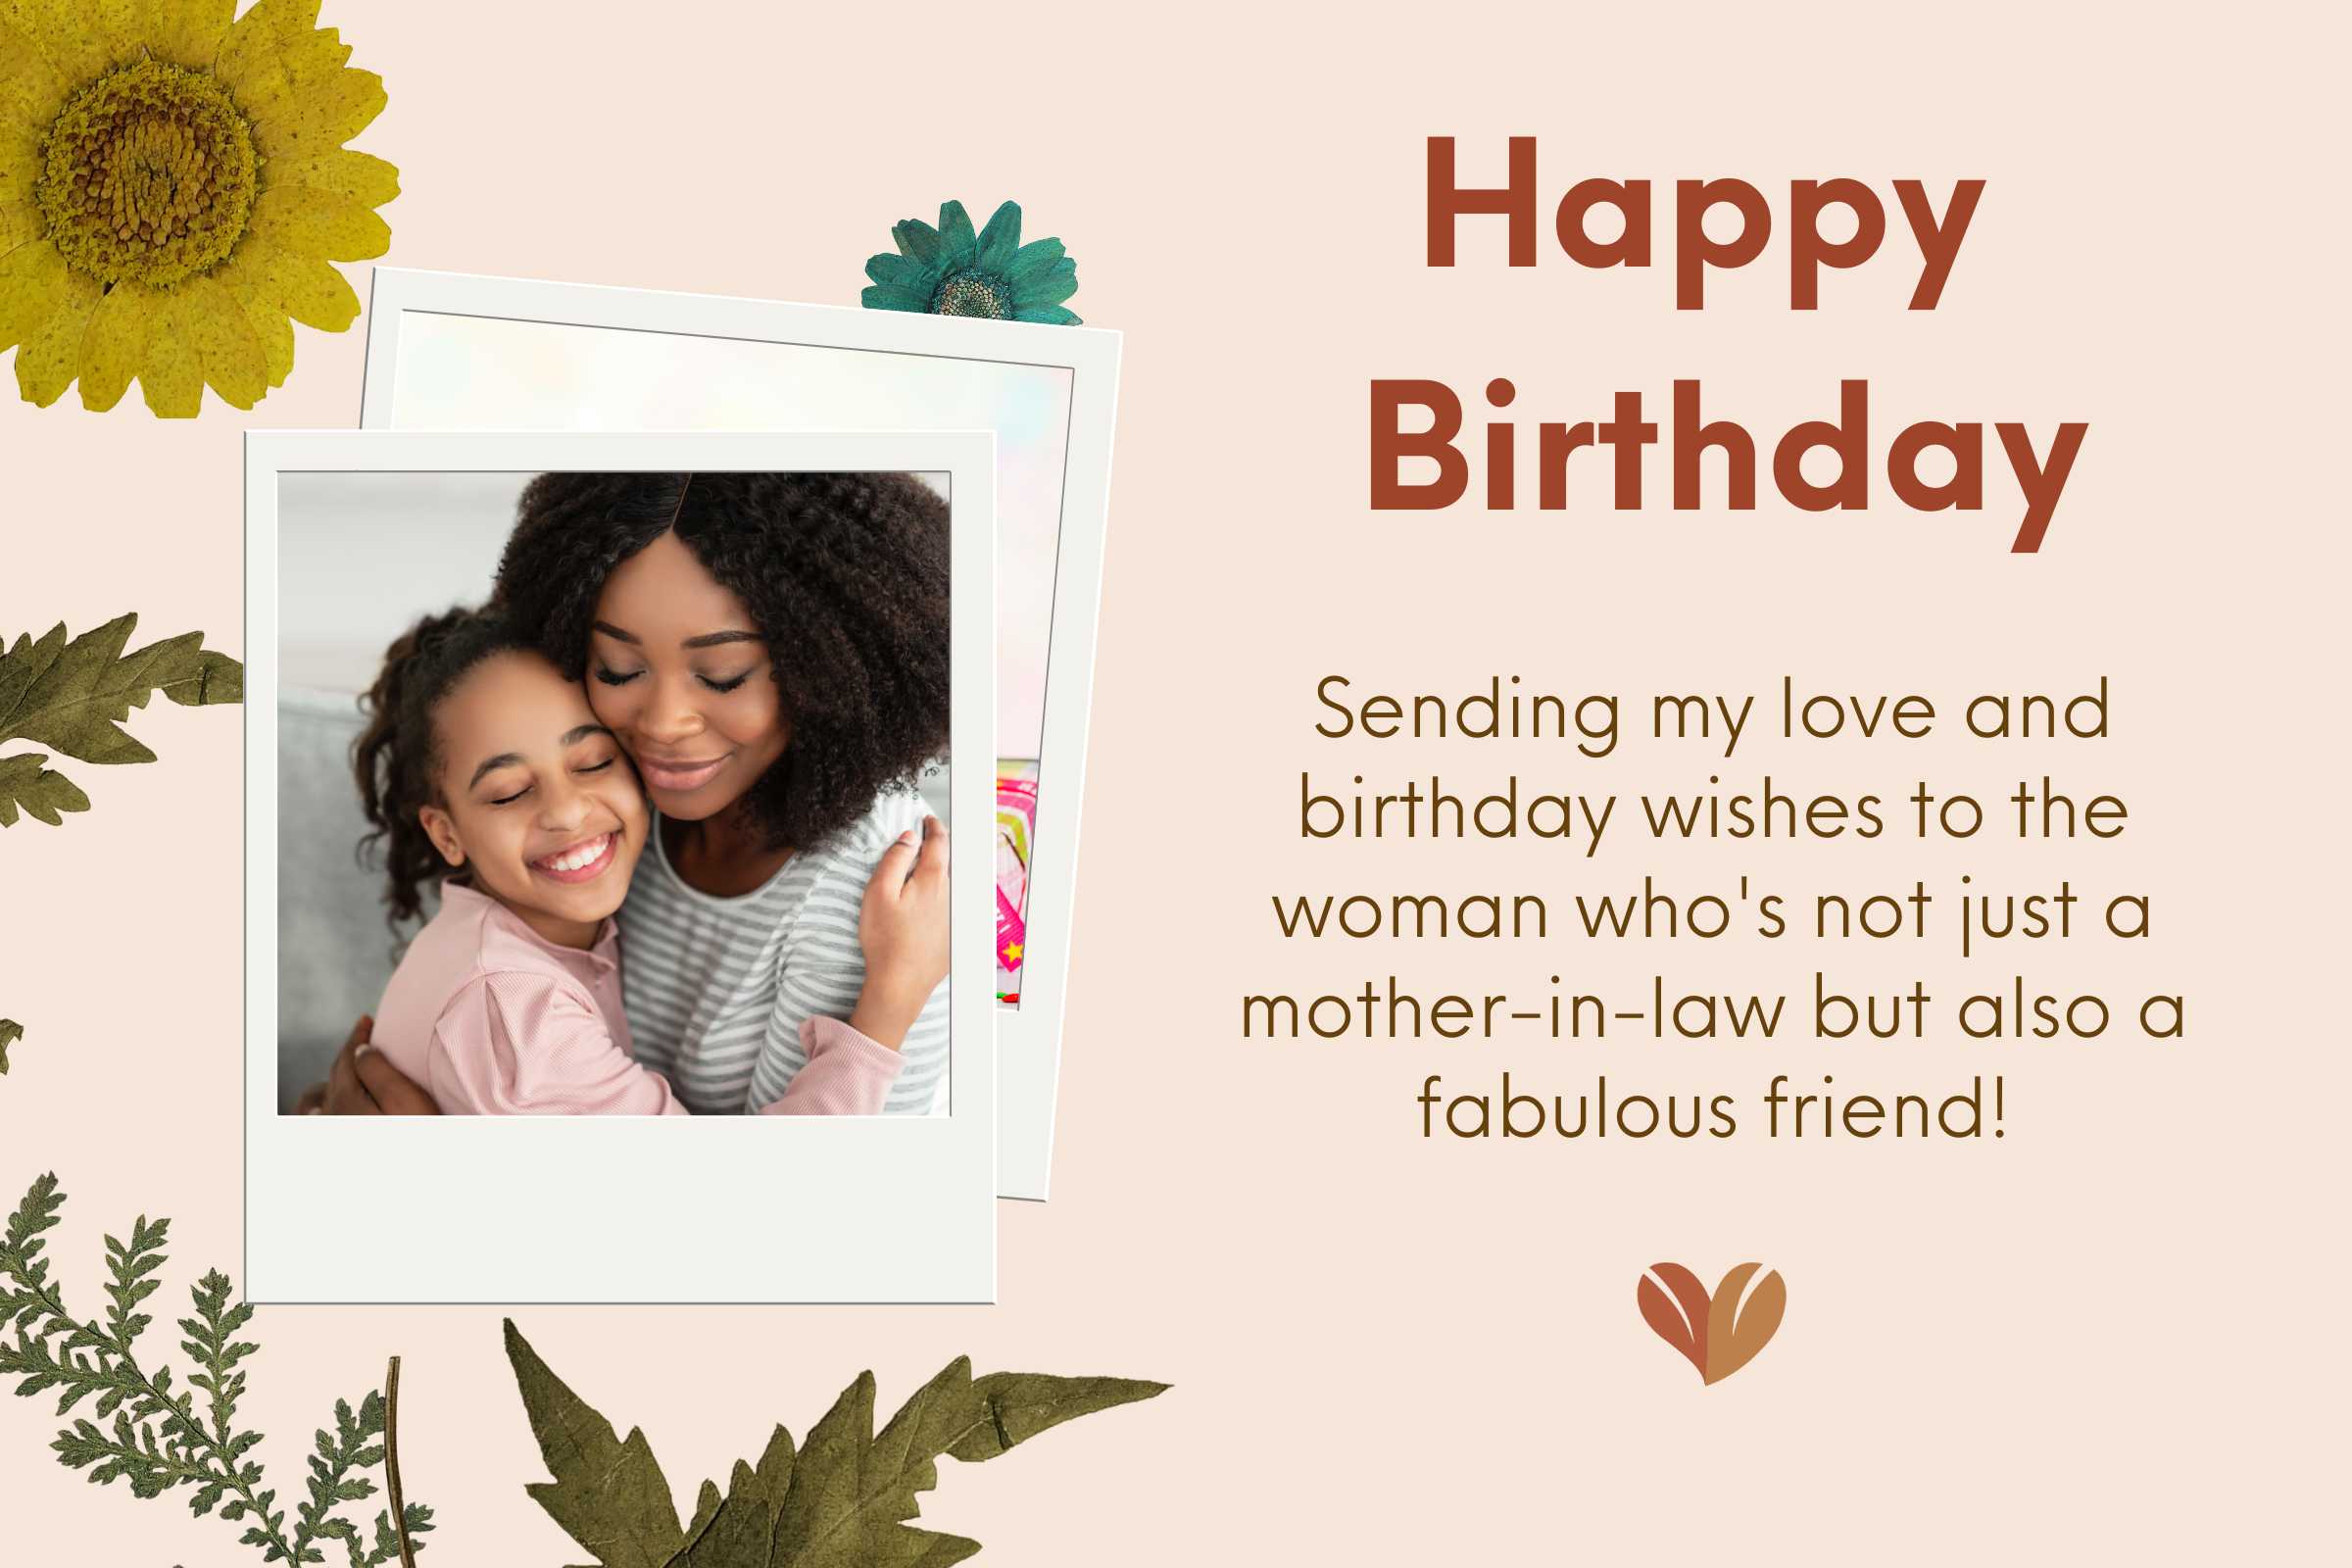 Sending birthday hugs and laughter with birthday quotes for mother-in-law